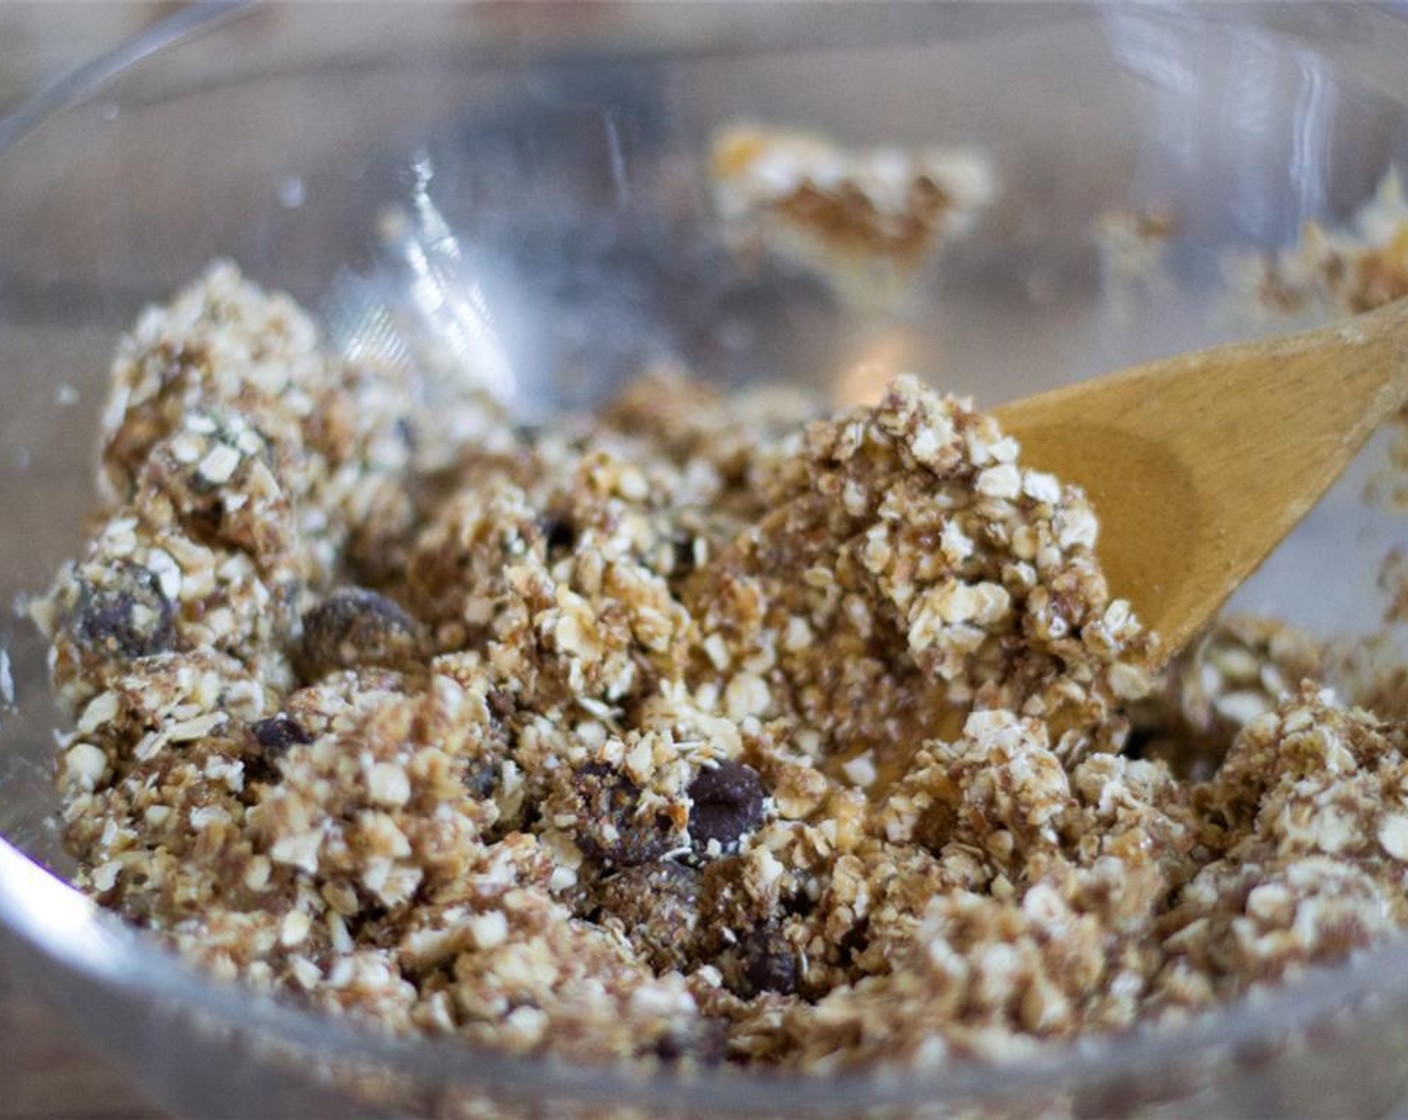 step 2 Mix Old Fashioned Rolled Oats (1 cup), Creamy Natural Peanut Butter (1/2 cup), Flaxseed Meal (1/2 cup), Raw Honey (1/3 cup), Dark Chocolate Chips (1/2 cup), and the chopped almonds together until dry ingredients are coated completely.